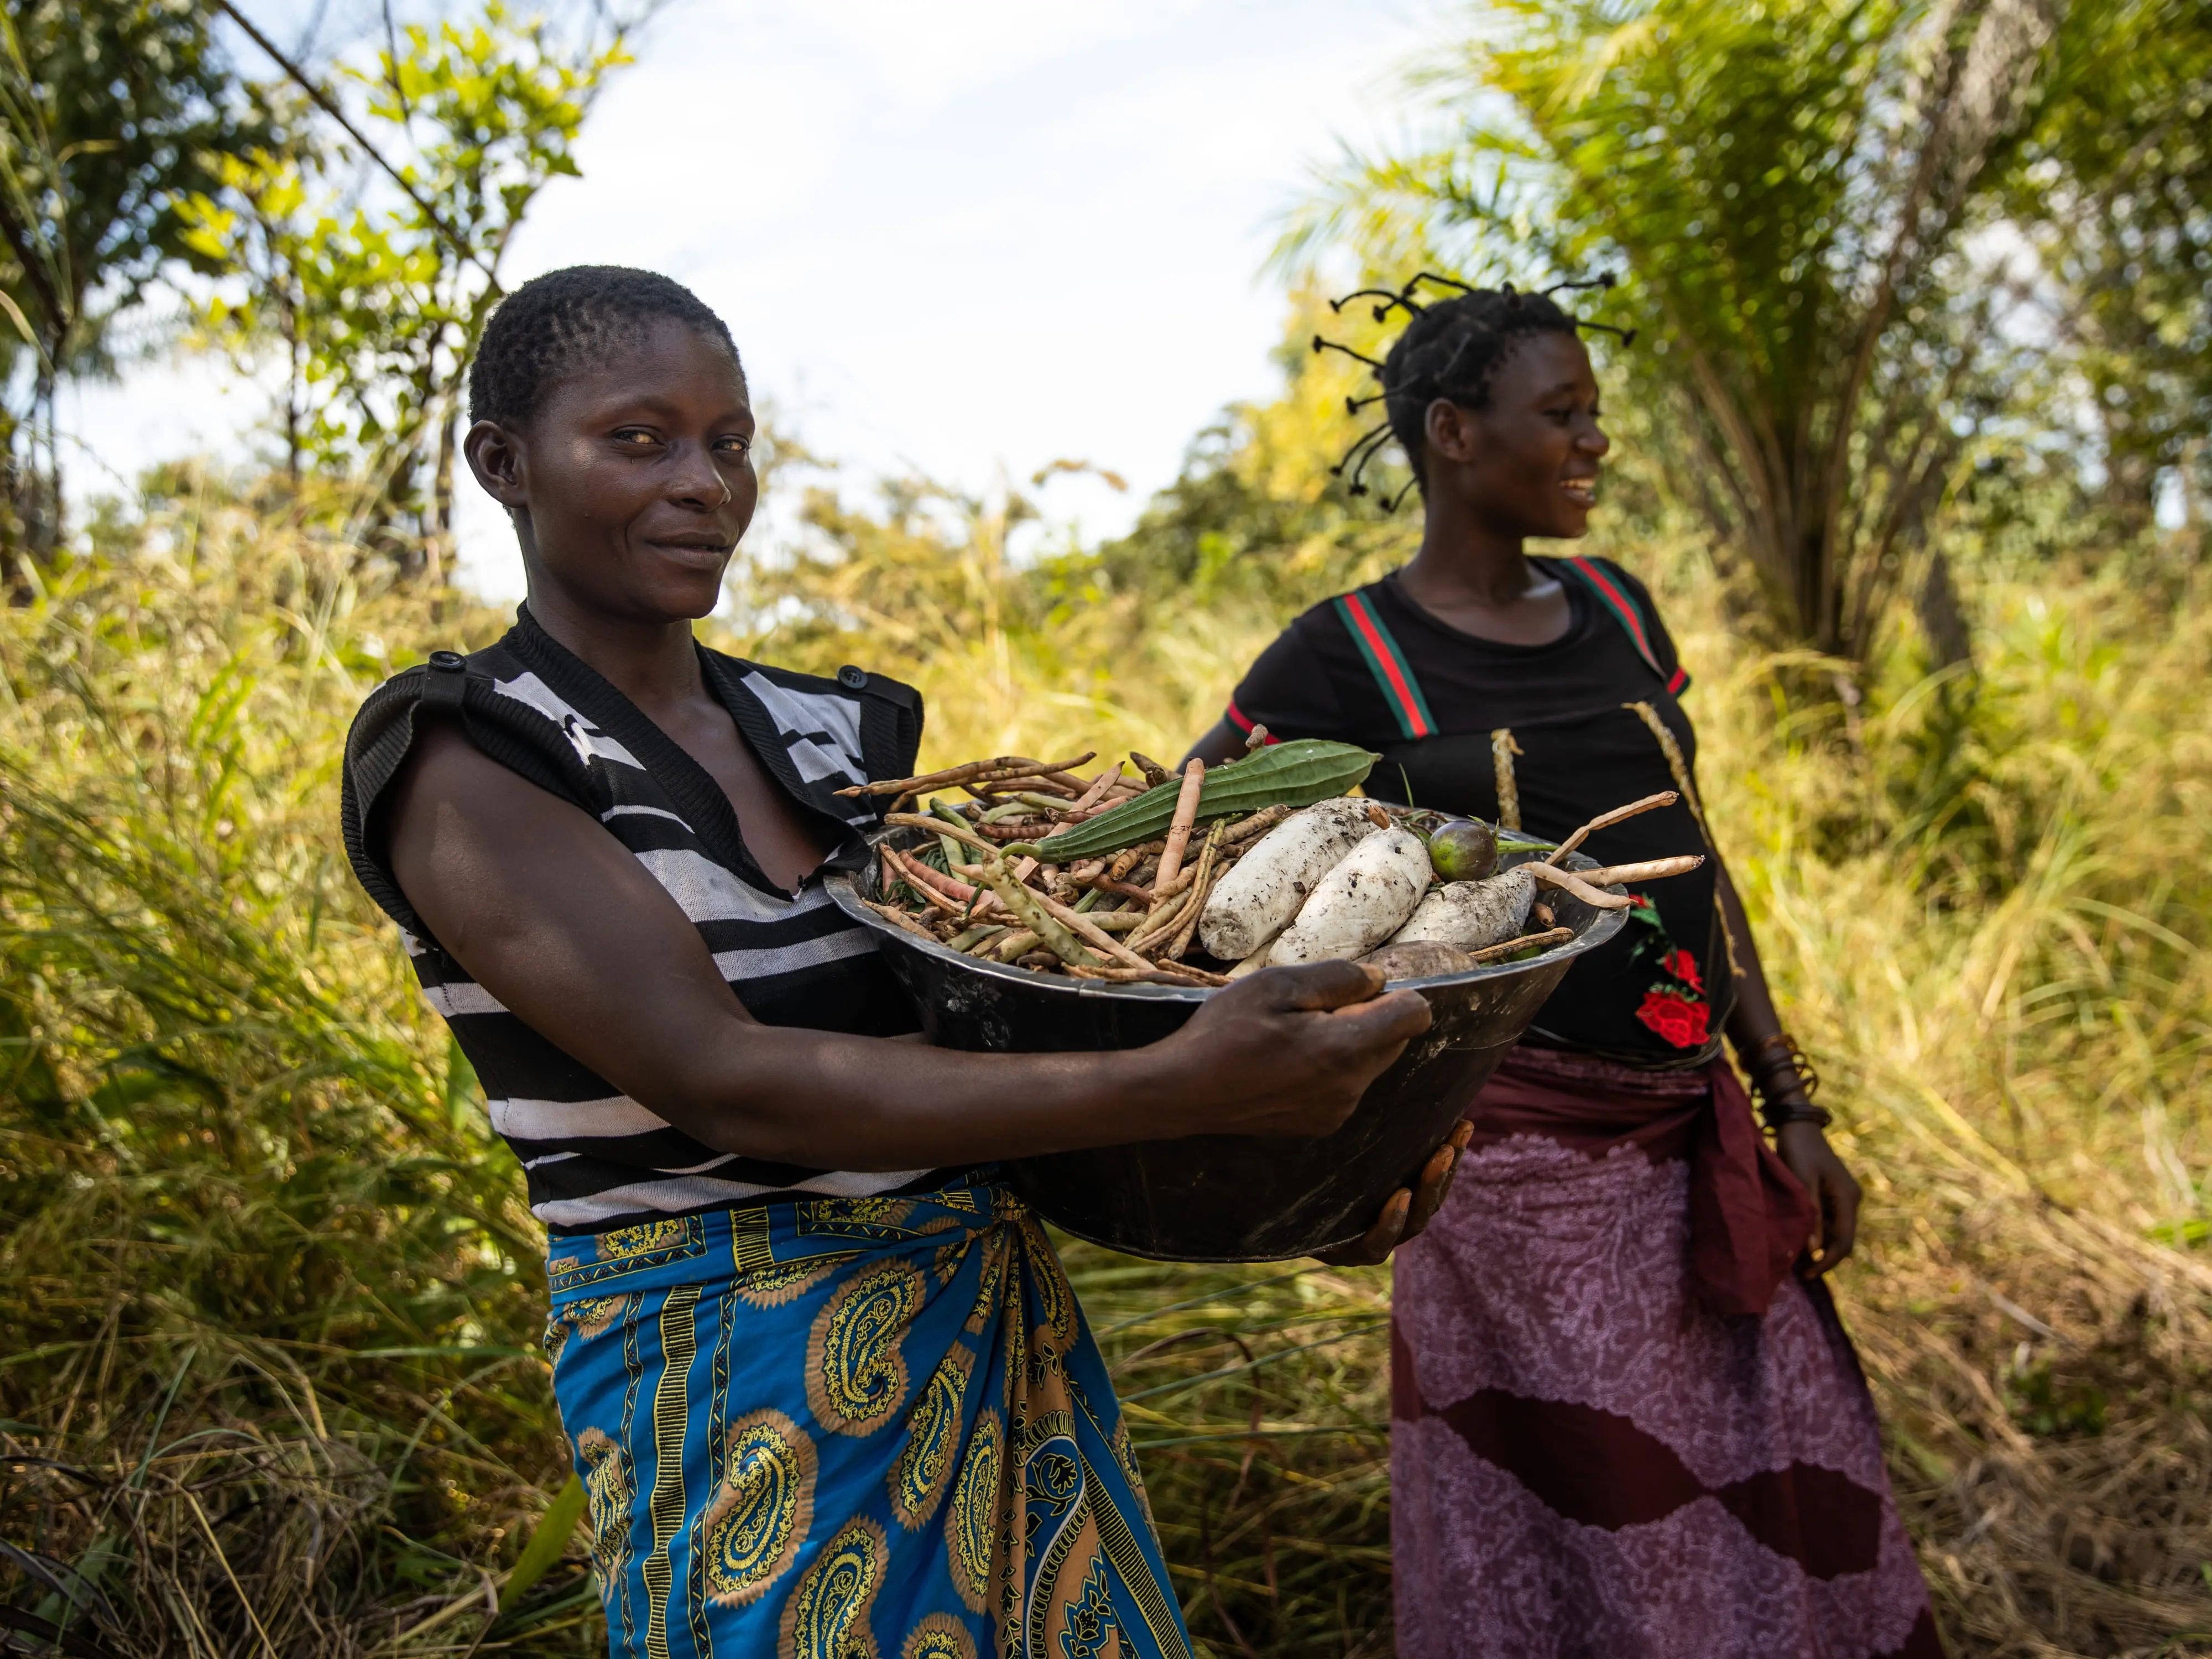 Therese Yumba wa Ilunga, 45 (left) is a participant in Concern's Food for Peace program in Manono Territory, DRC